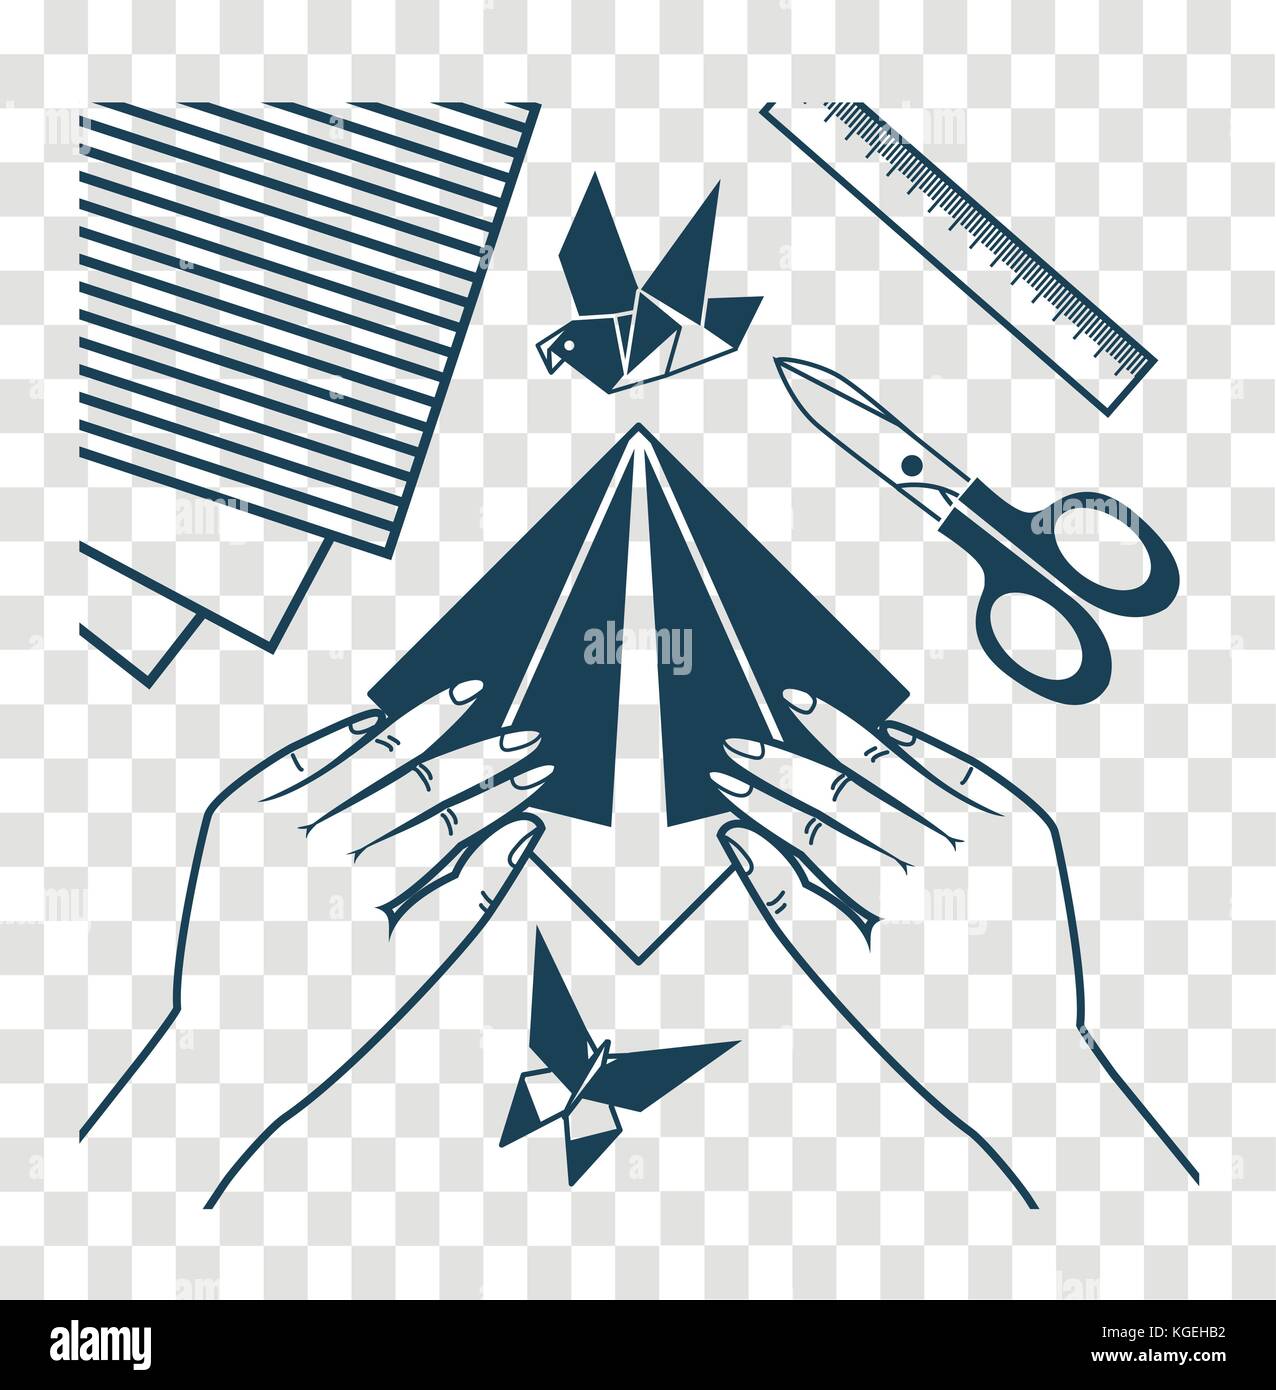 concept of origami lessons, children's creativity in the form of hands bending sheet of paper. Icon, silhouette in linear style Stock Vector